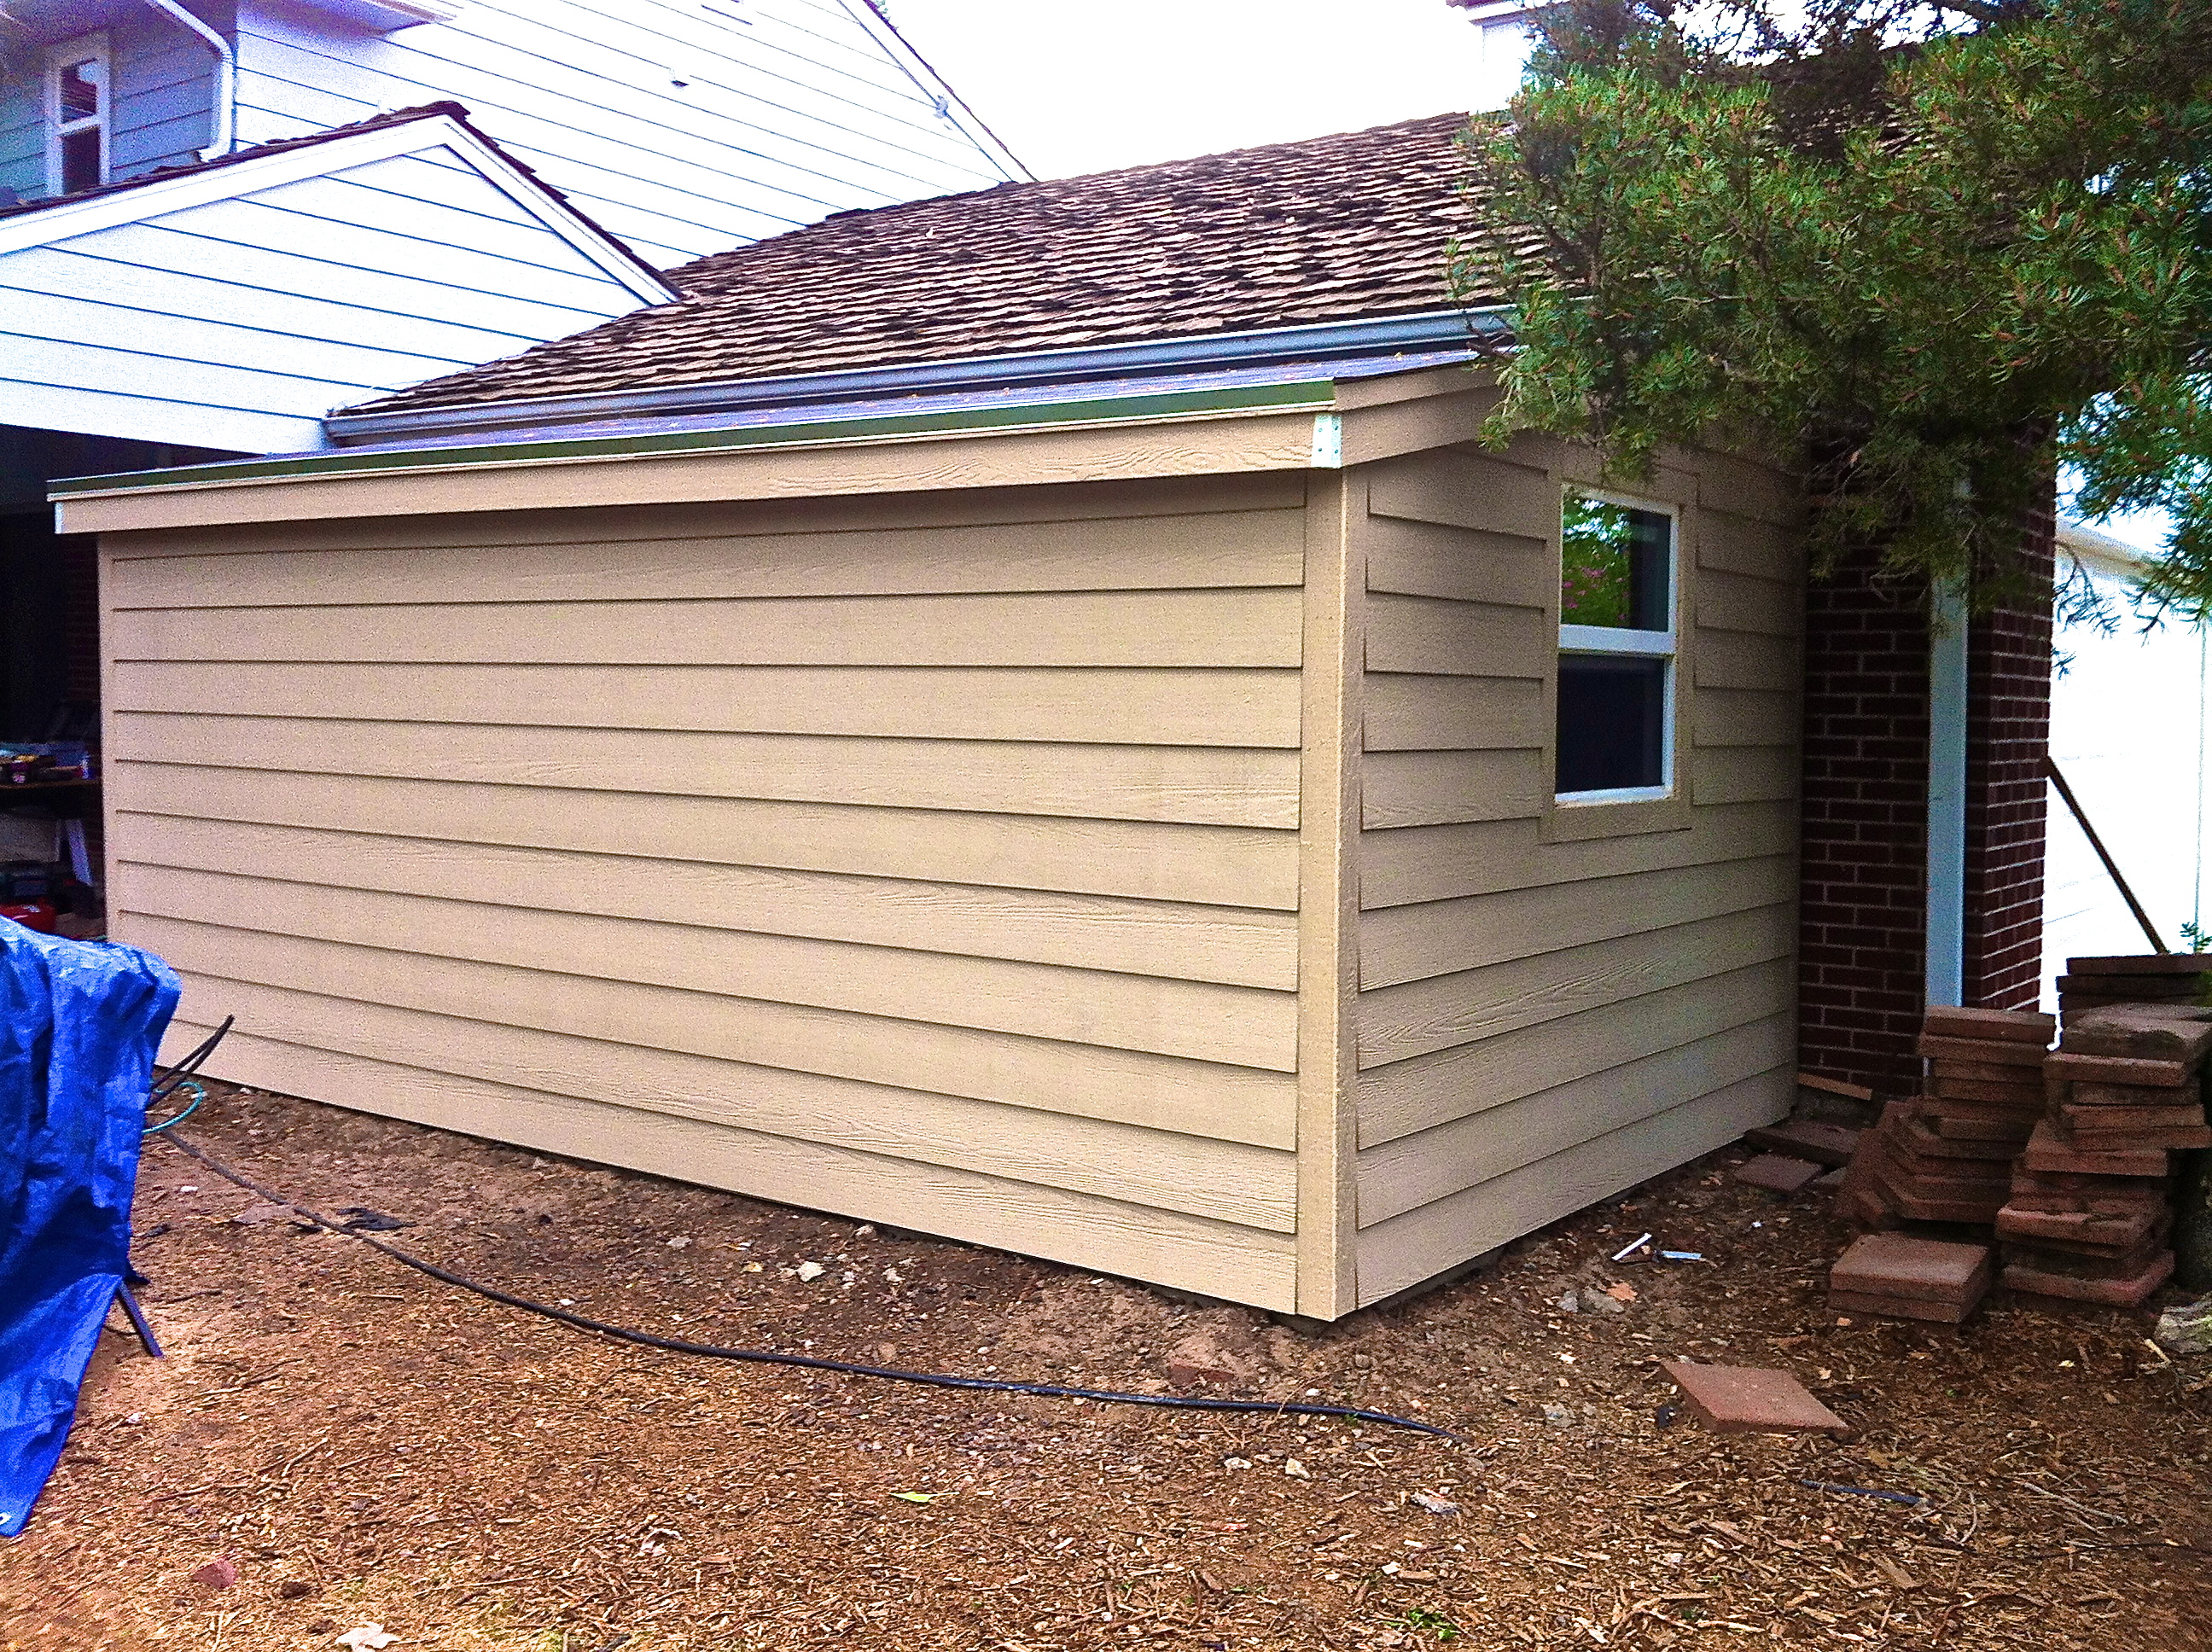 How To Build A Storage Shed Attached To Your Home | Jim Cardon Customs